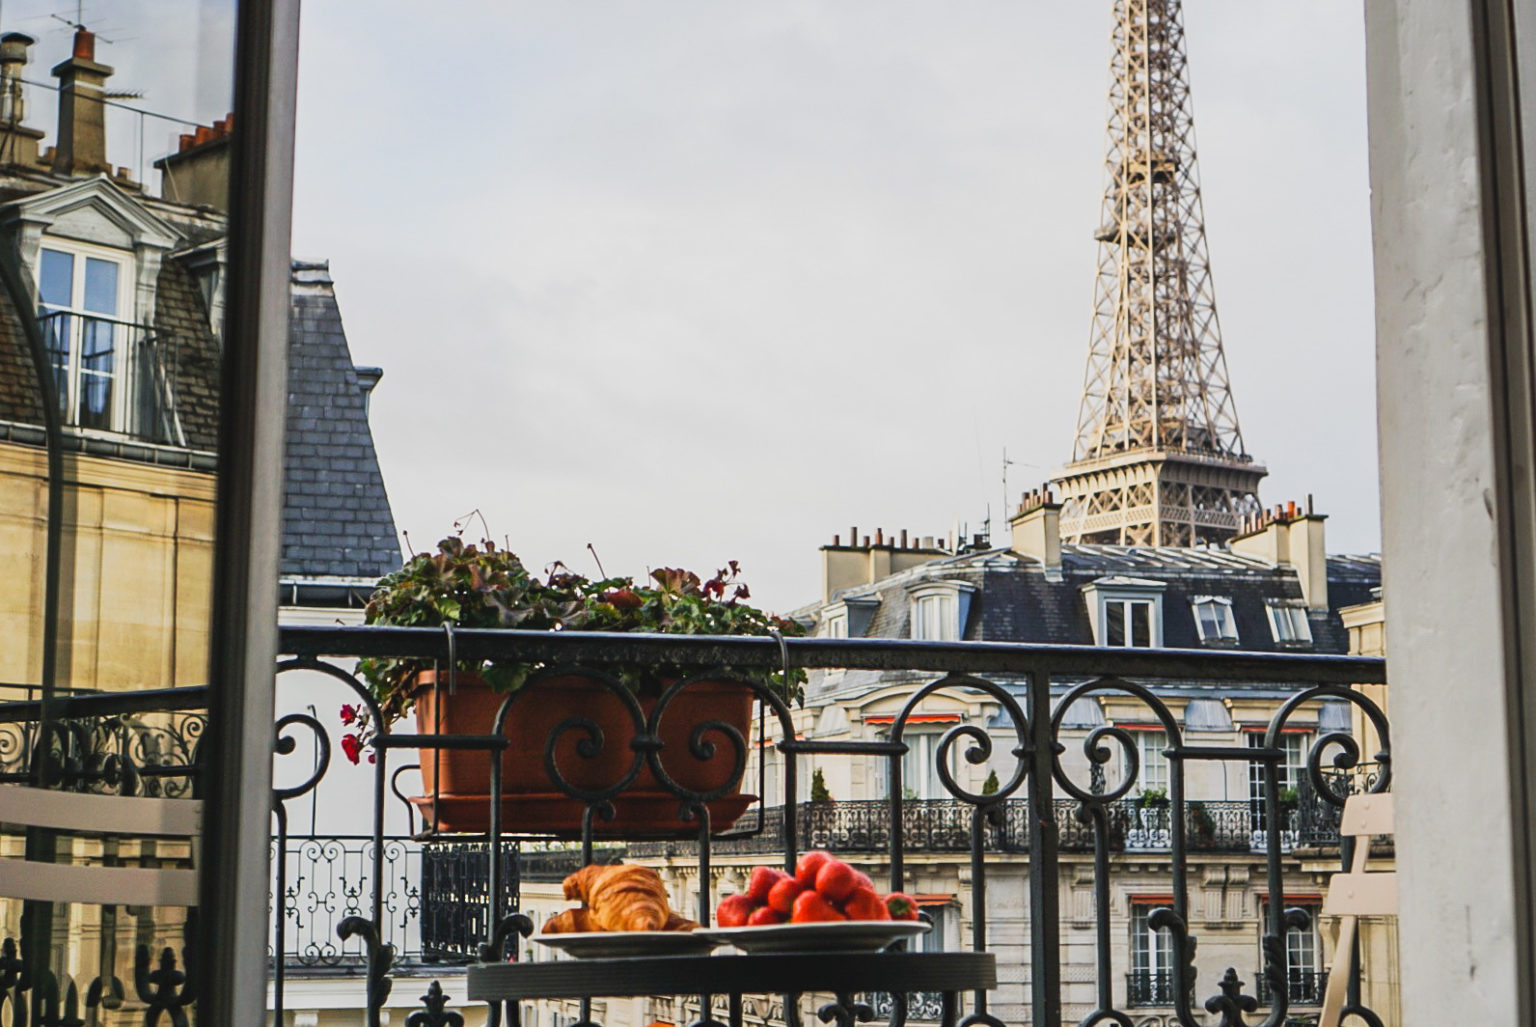 Stay In Paris With An Eiffel Tower View - Yes You Can!